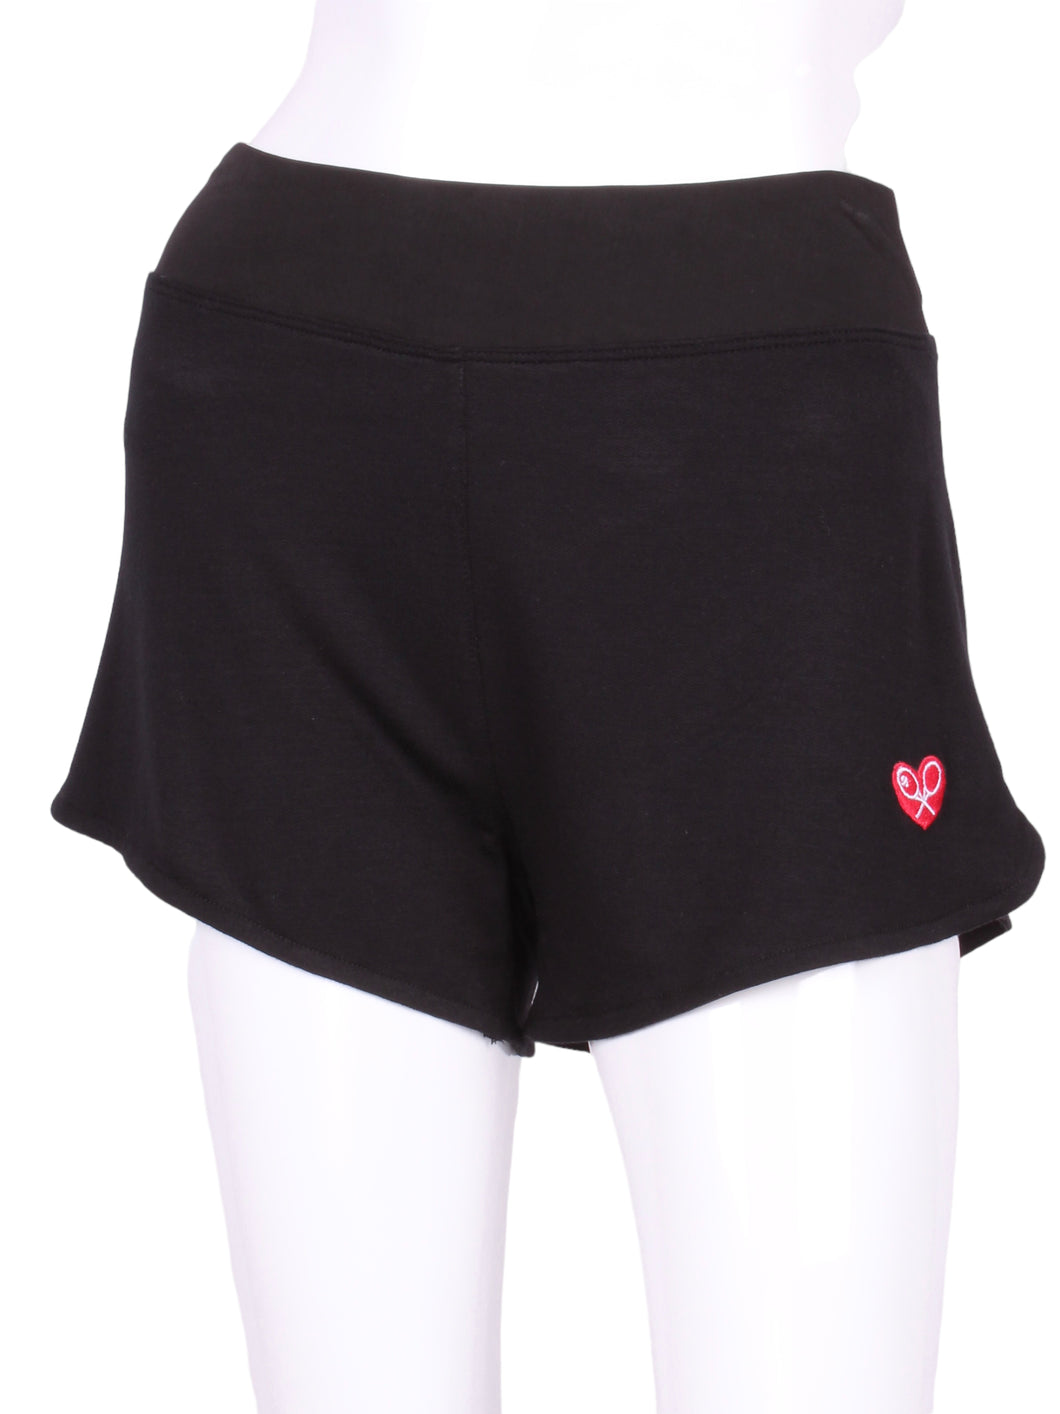 Get some tan legs while on the court with my super cute and sexy shorts.   Very light and cool - Really soft, comfortable and breathable fabric.  If you don’t fear the sun on your body - and love being air conditioned - then these are the shorts for you!!!